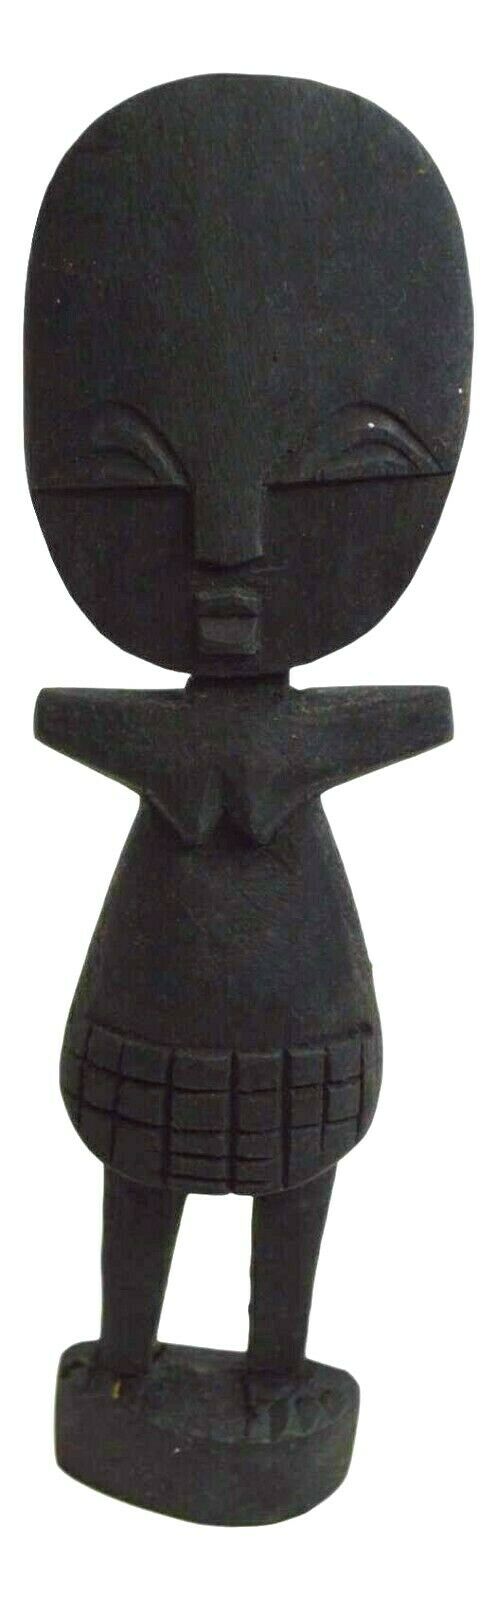 MID 20TH CENTURY AFRICAN HAND CARVED WOOD FERTILITY DOLL